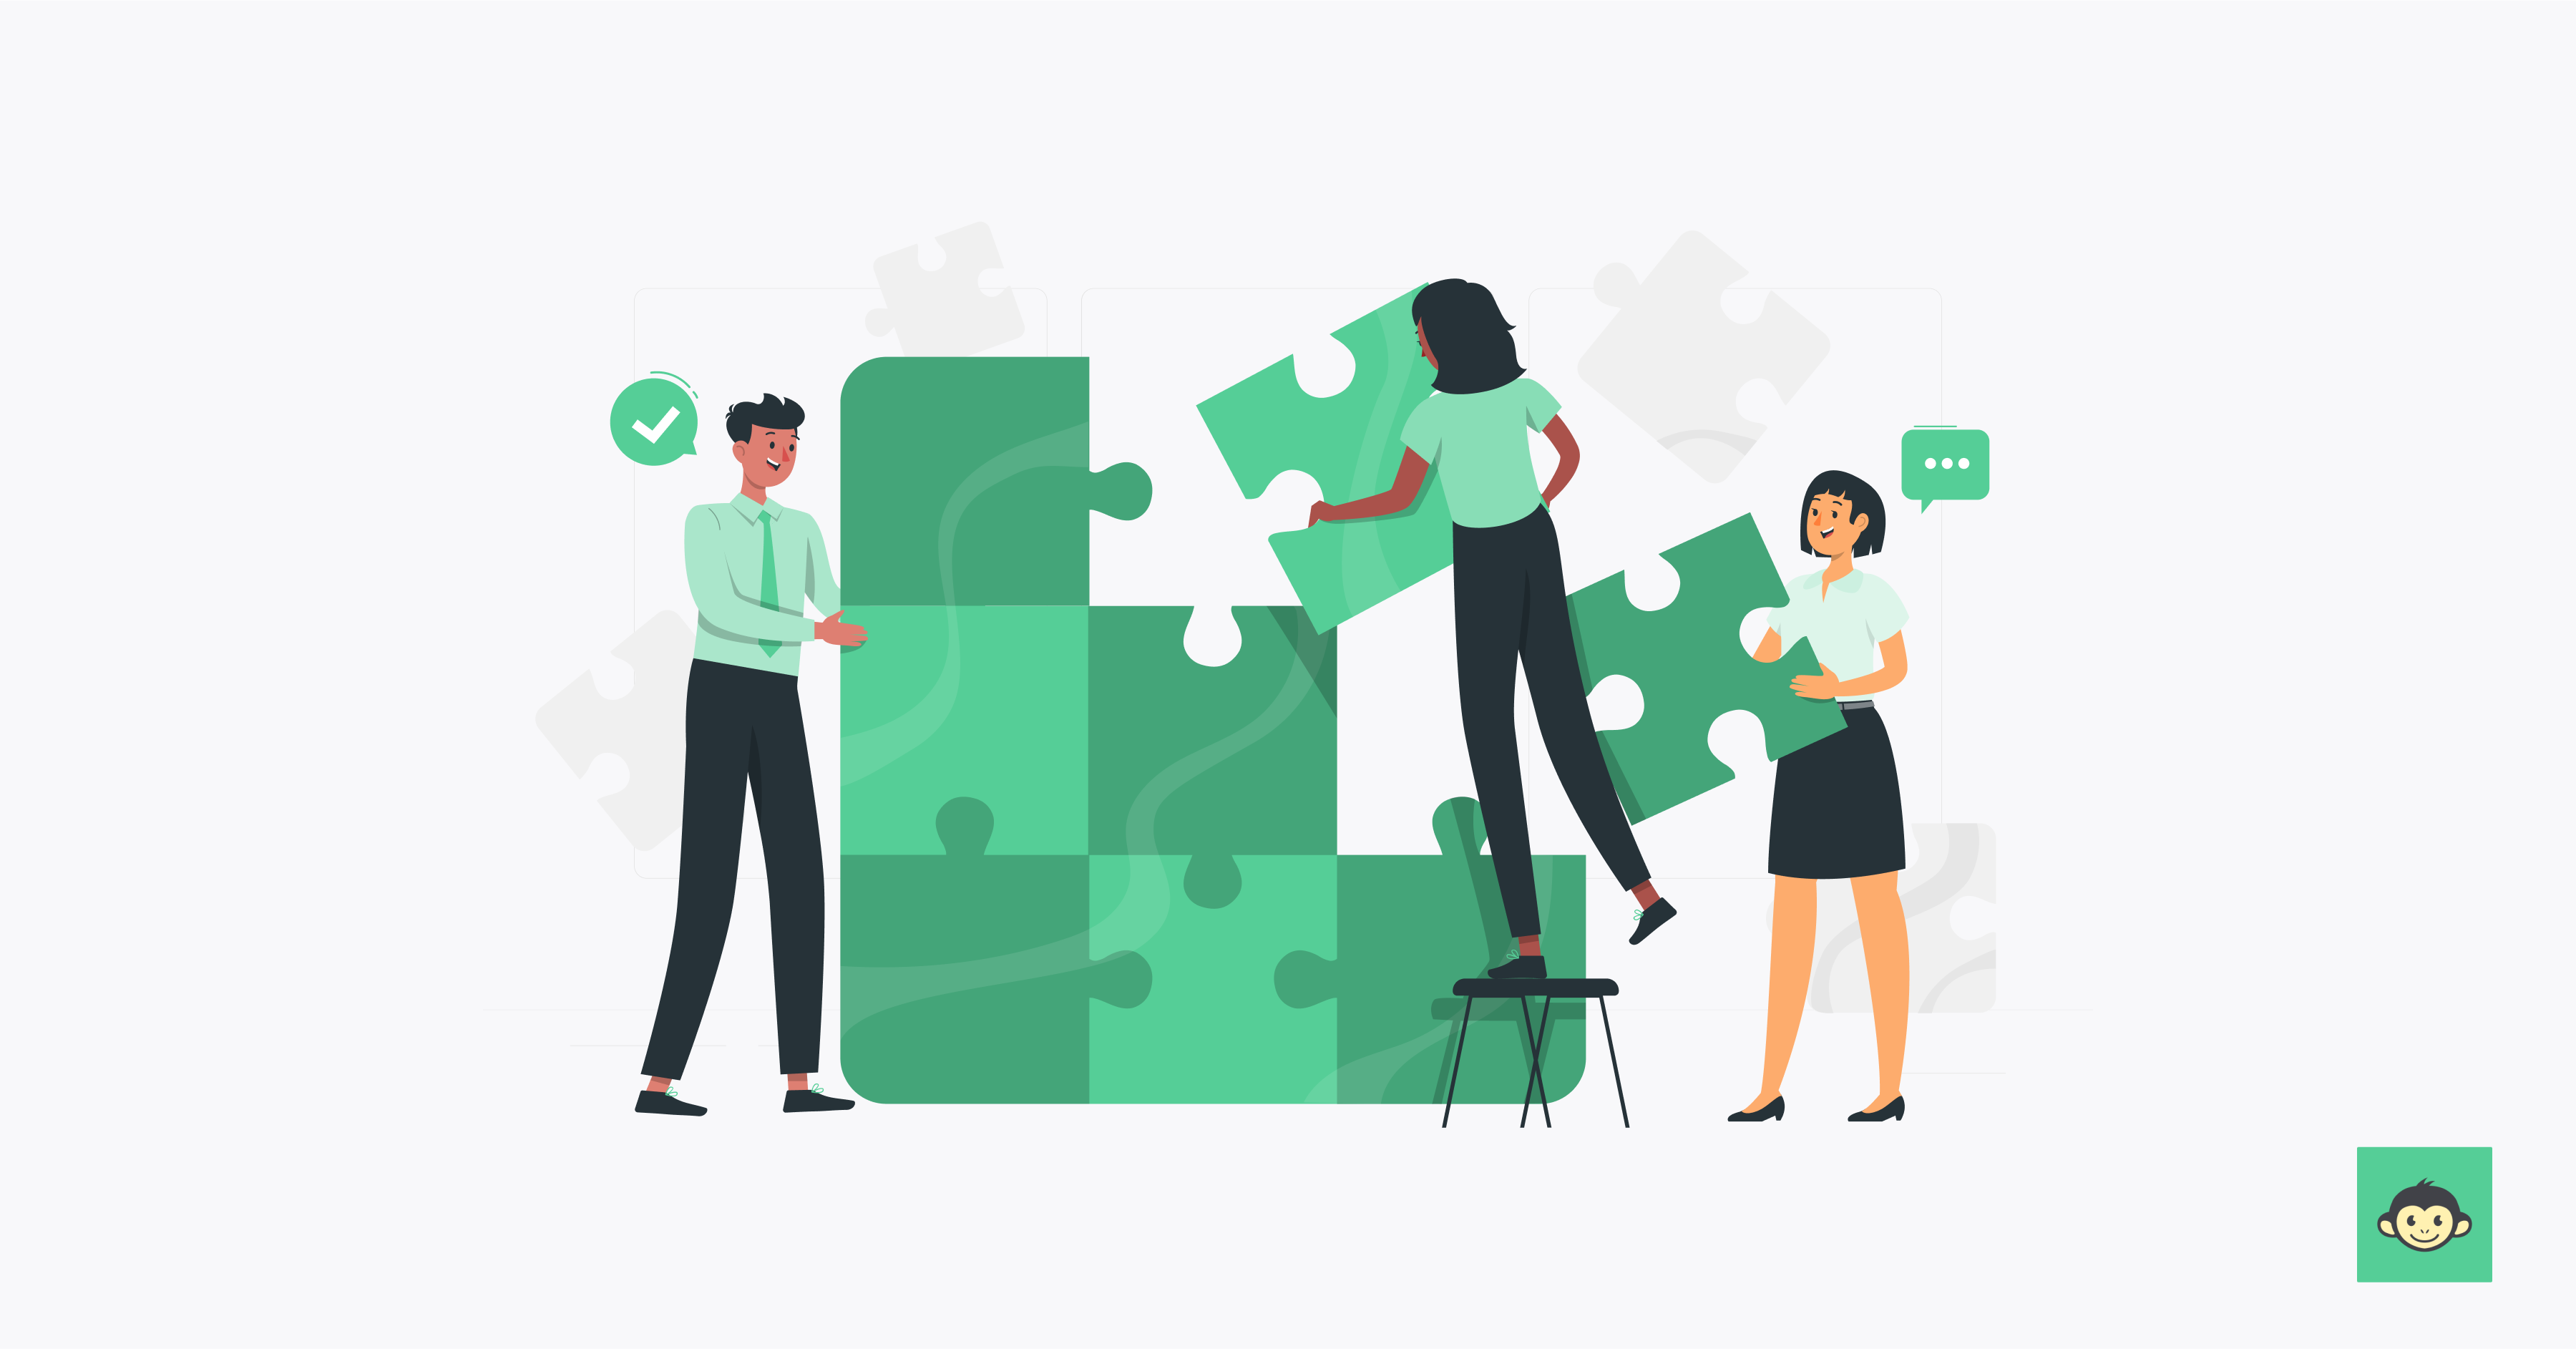 Employees are connecting puzzles together in the workplace